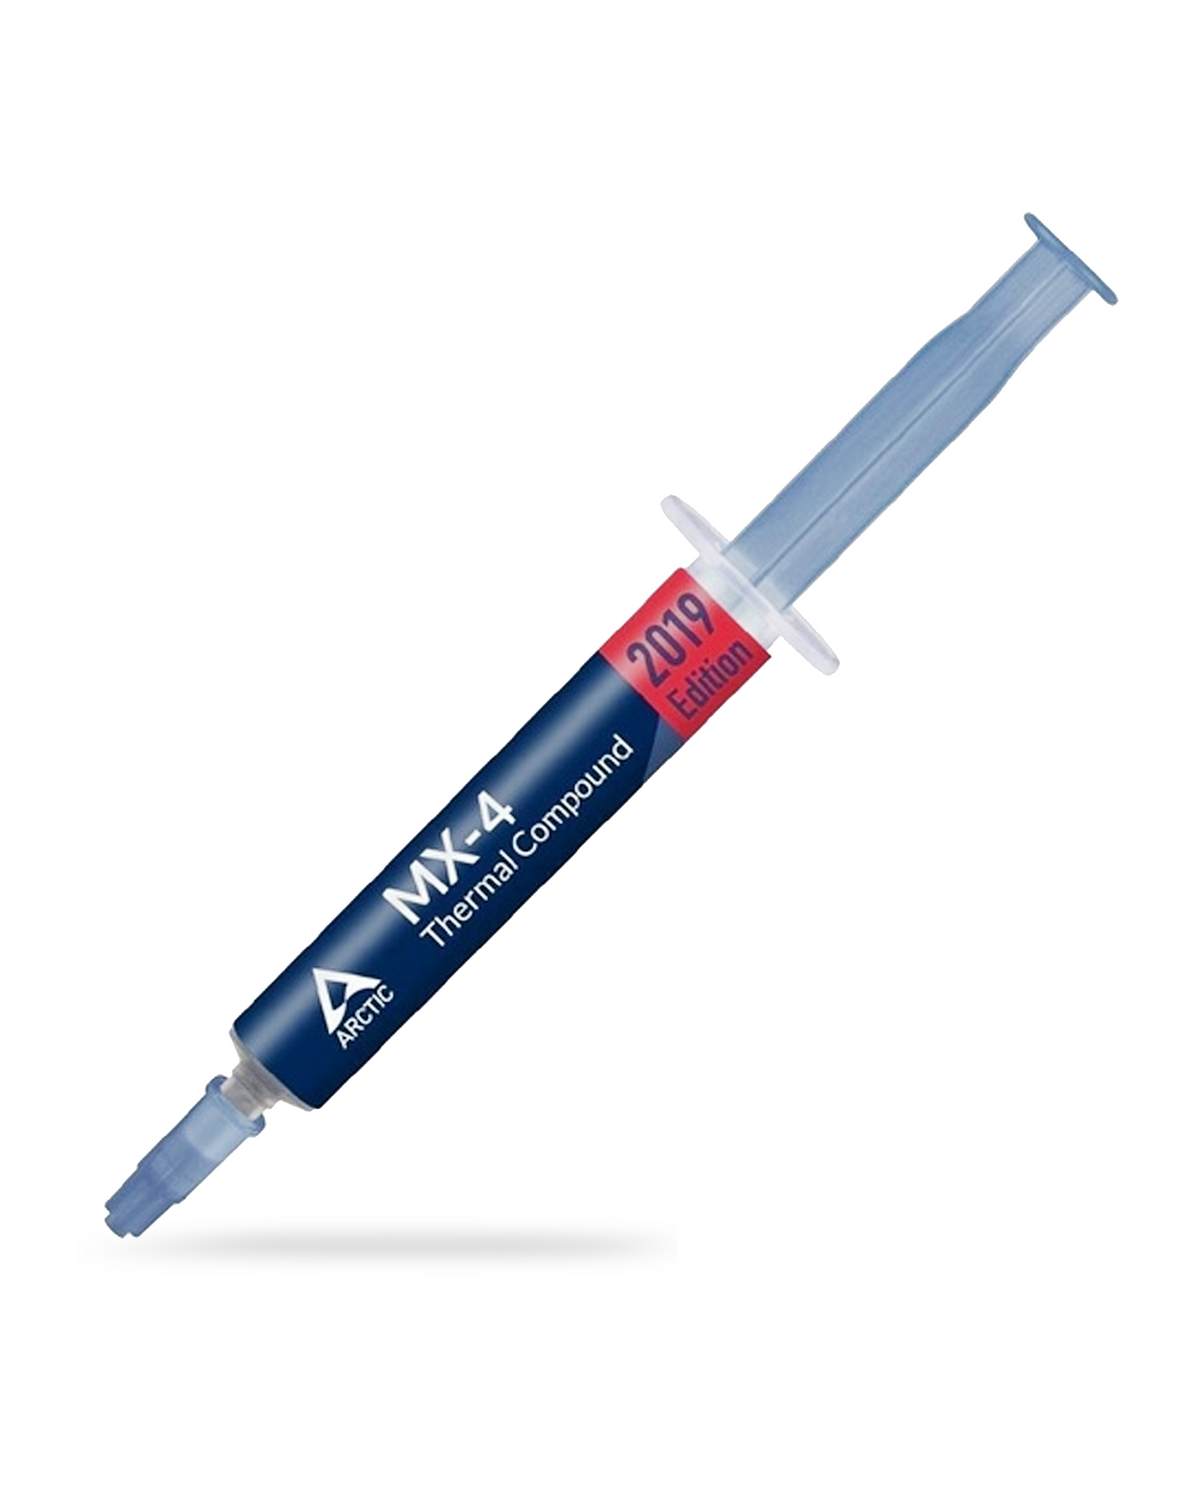 Silver MX-4 Thermal Compound Paste Carbon Based High Performance Heatsink Paste (4g)(Arctic)